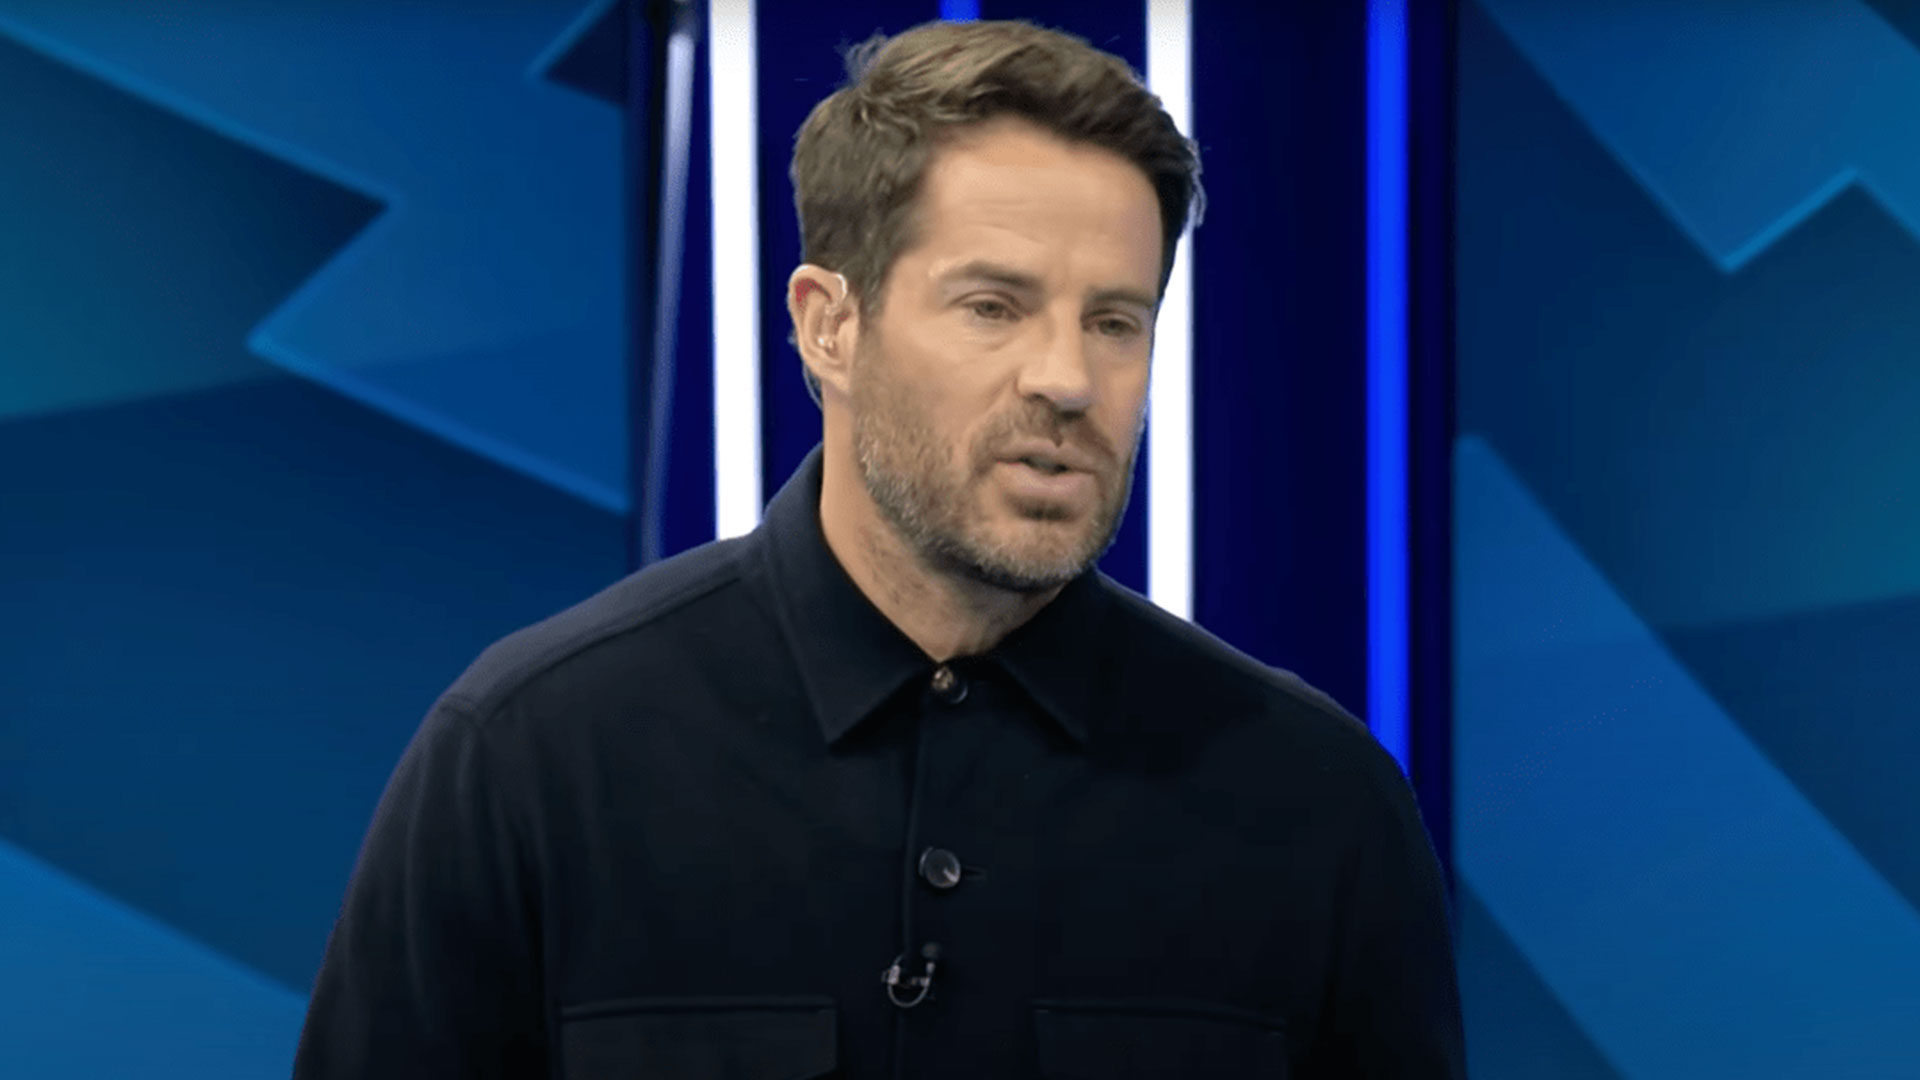 Jamie Redknapp names the two games that will decide whether Man City, Liverpool or Arsenal will win Premier League title